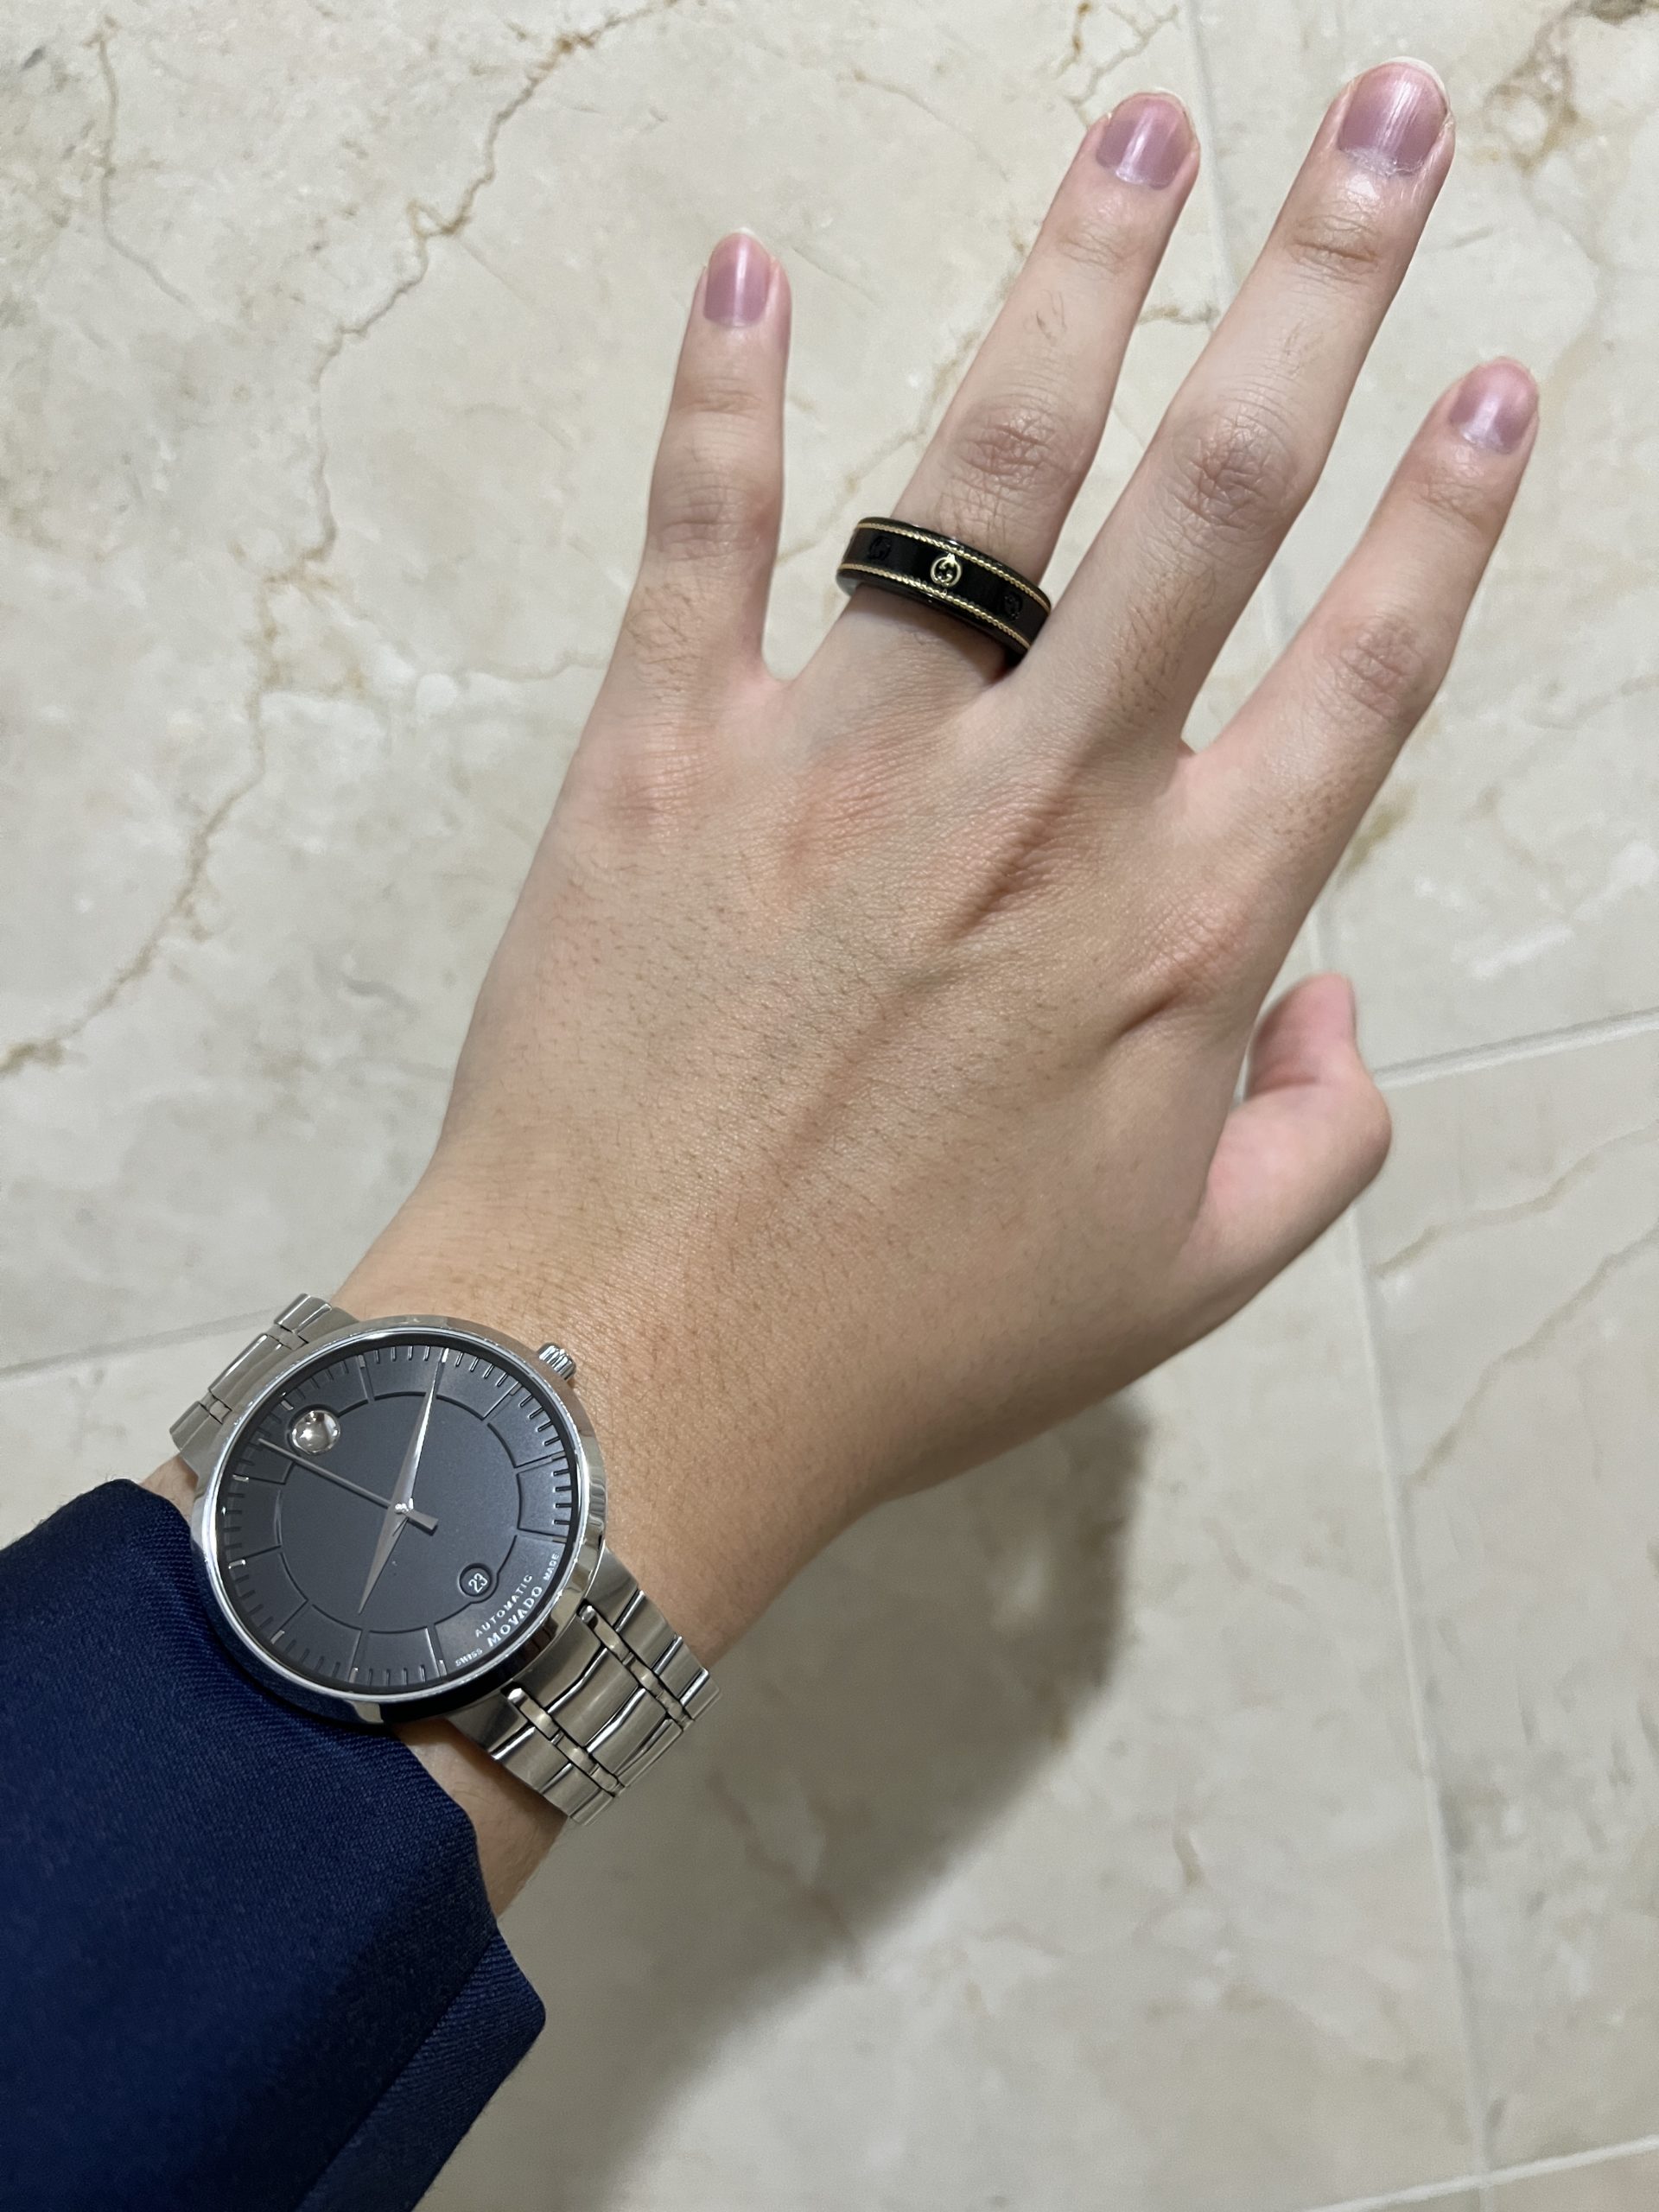 The Gucci x Oura Ring Returns for a Limited-Edition Run - The Pulse Blog